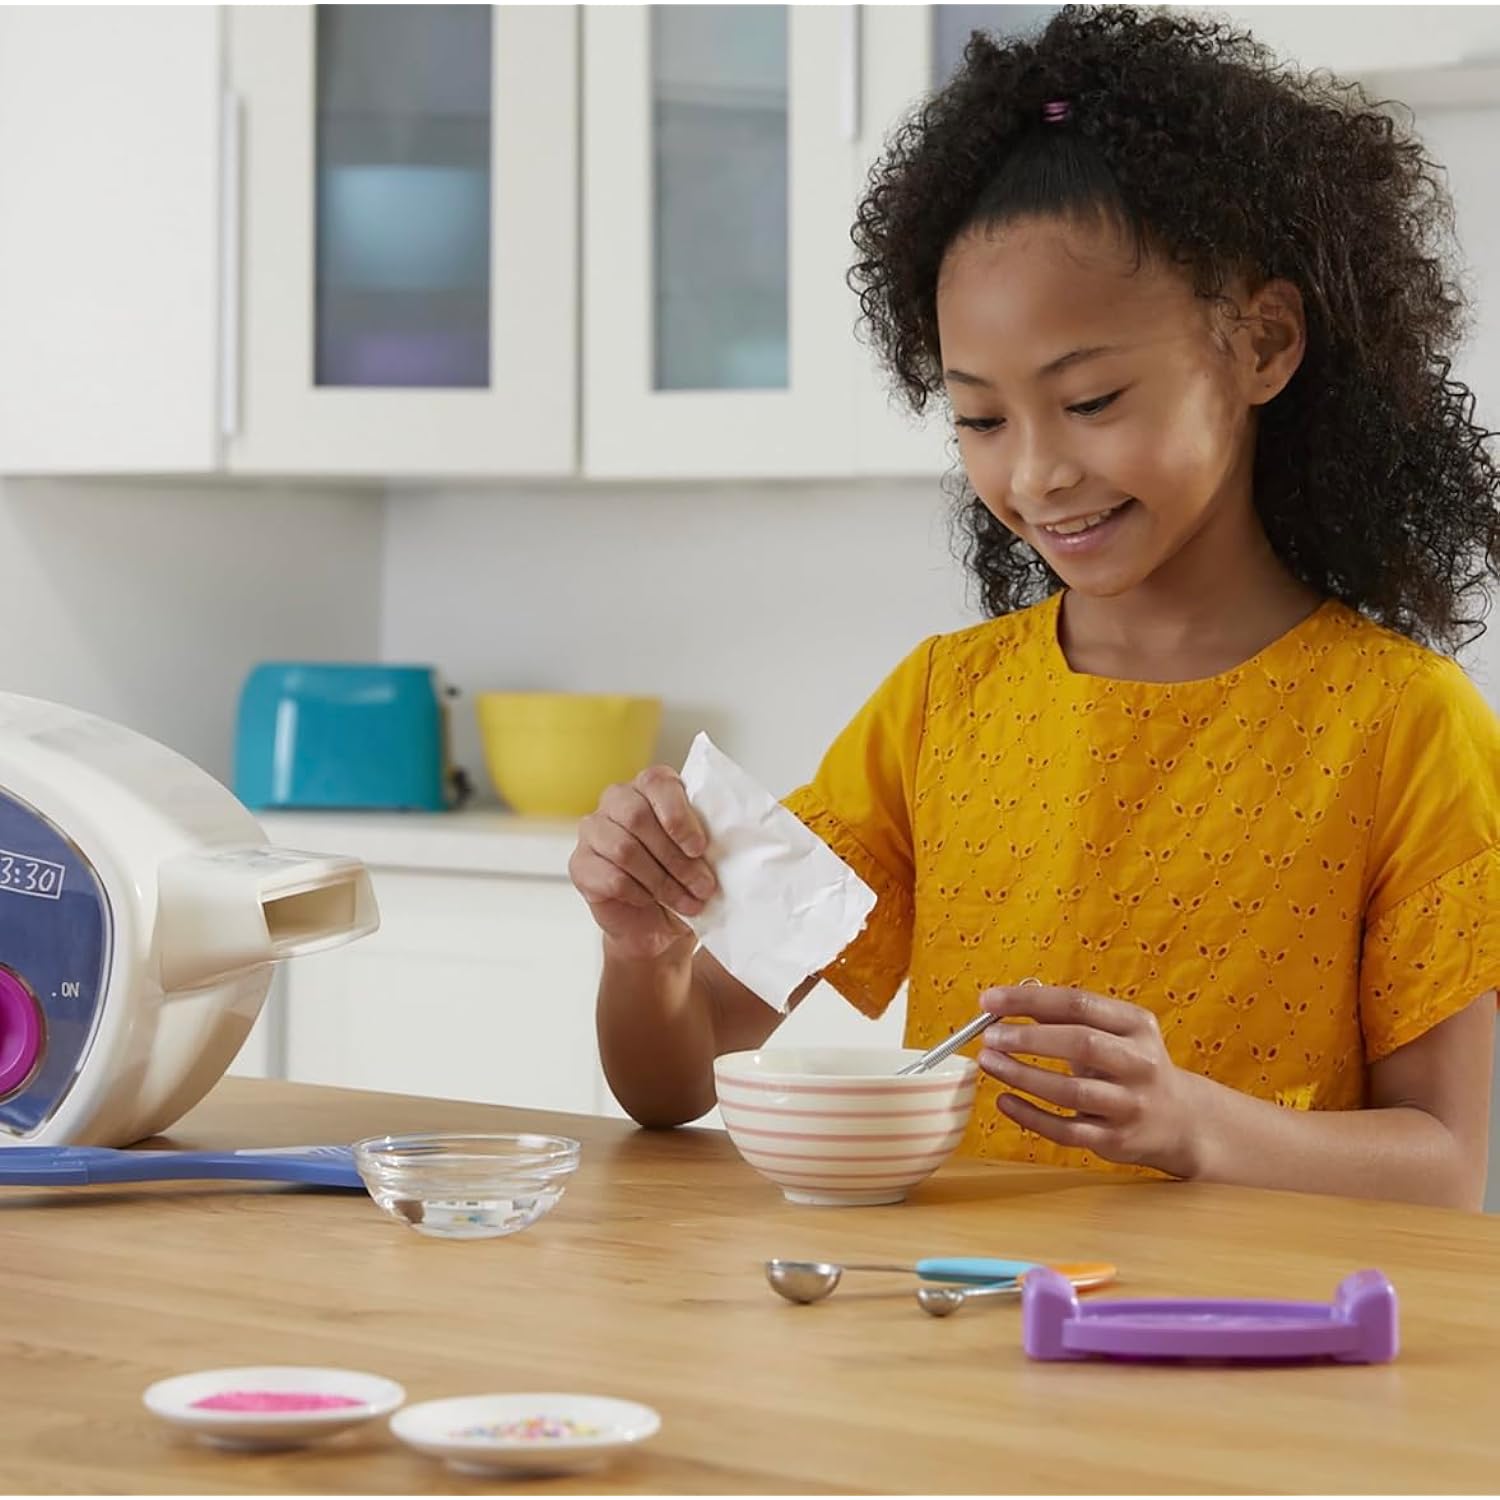 Hasbro Easy Bake Ultimate Oven, Baking Star Super Treat Edition with 3 Mixes. For ages 8 and up.